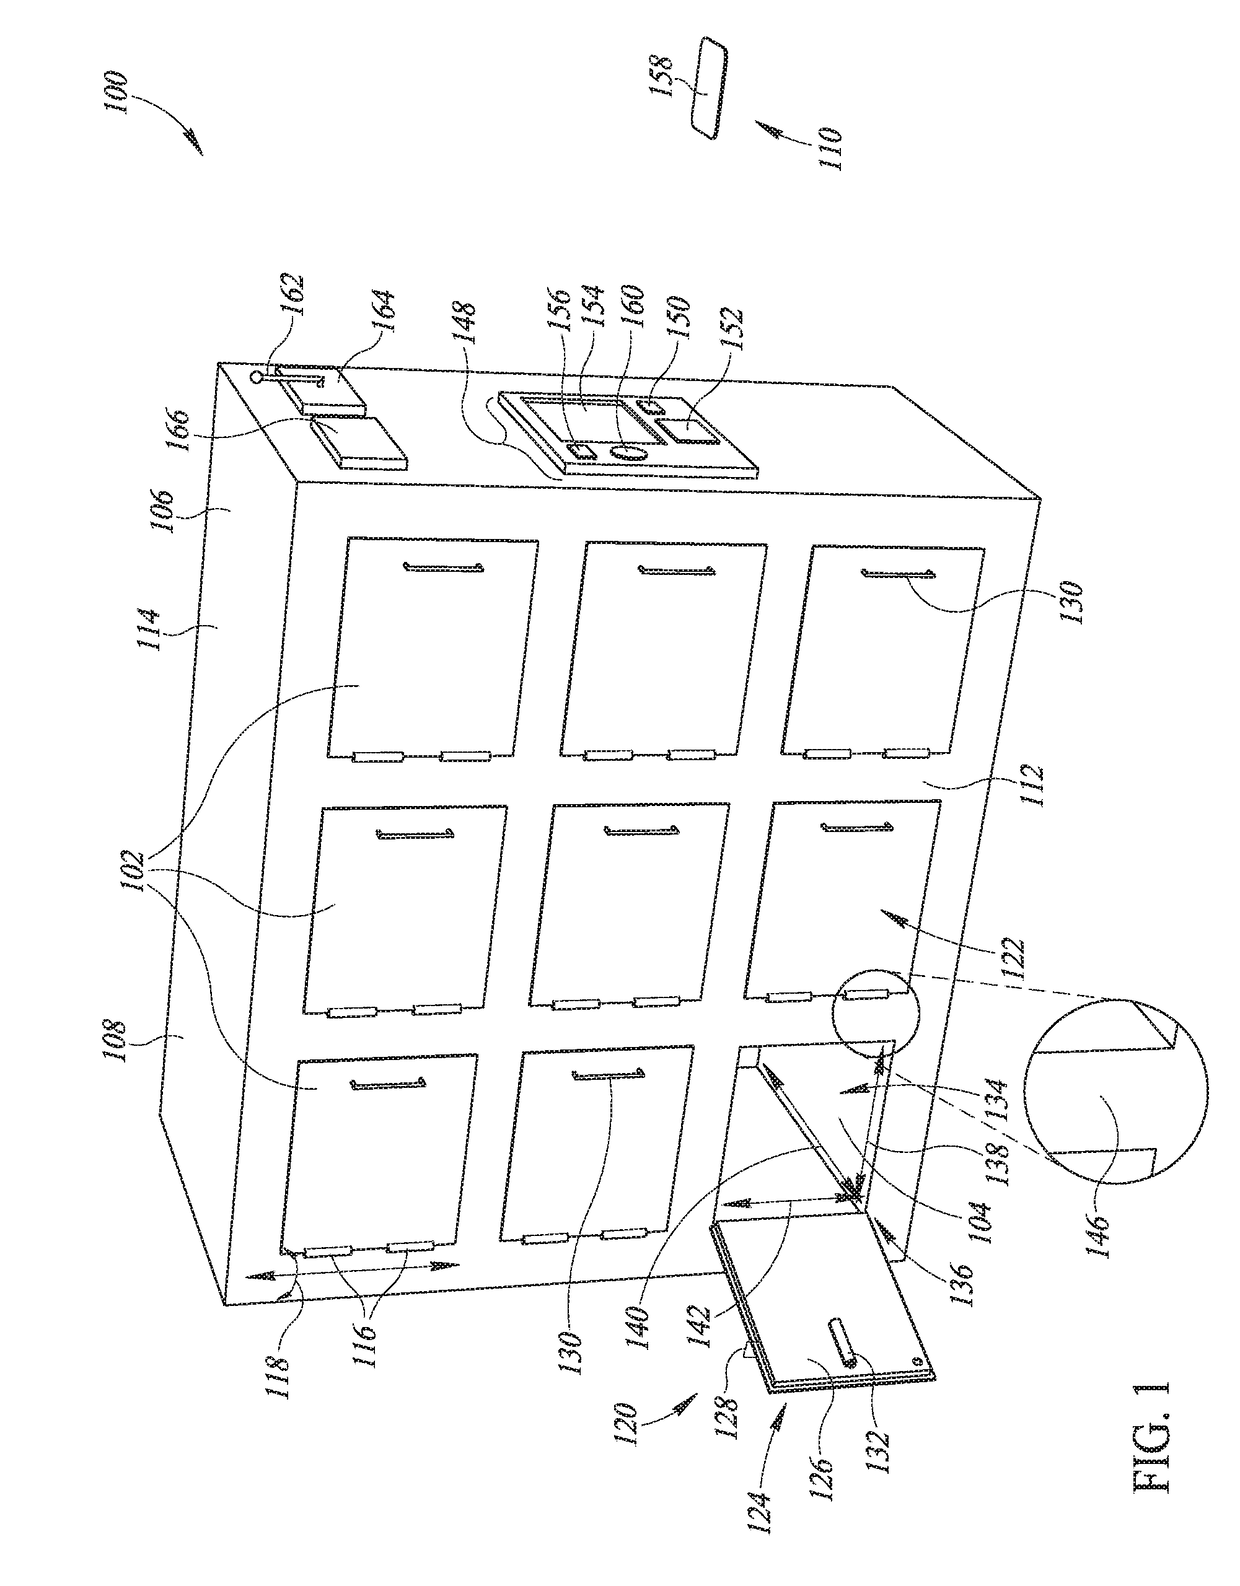 Multi-modal distribution systems and methods using vending kiosks and autonomous delivery vehicles